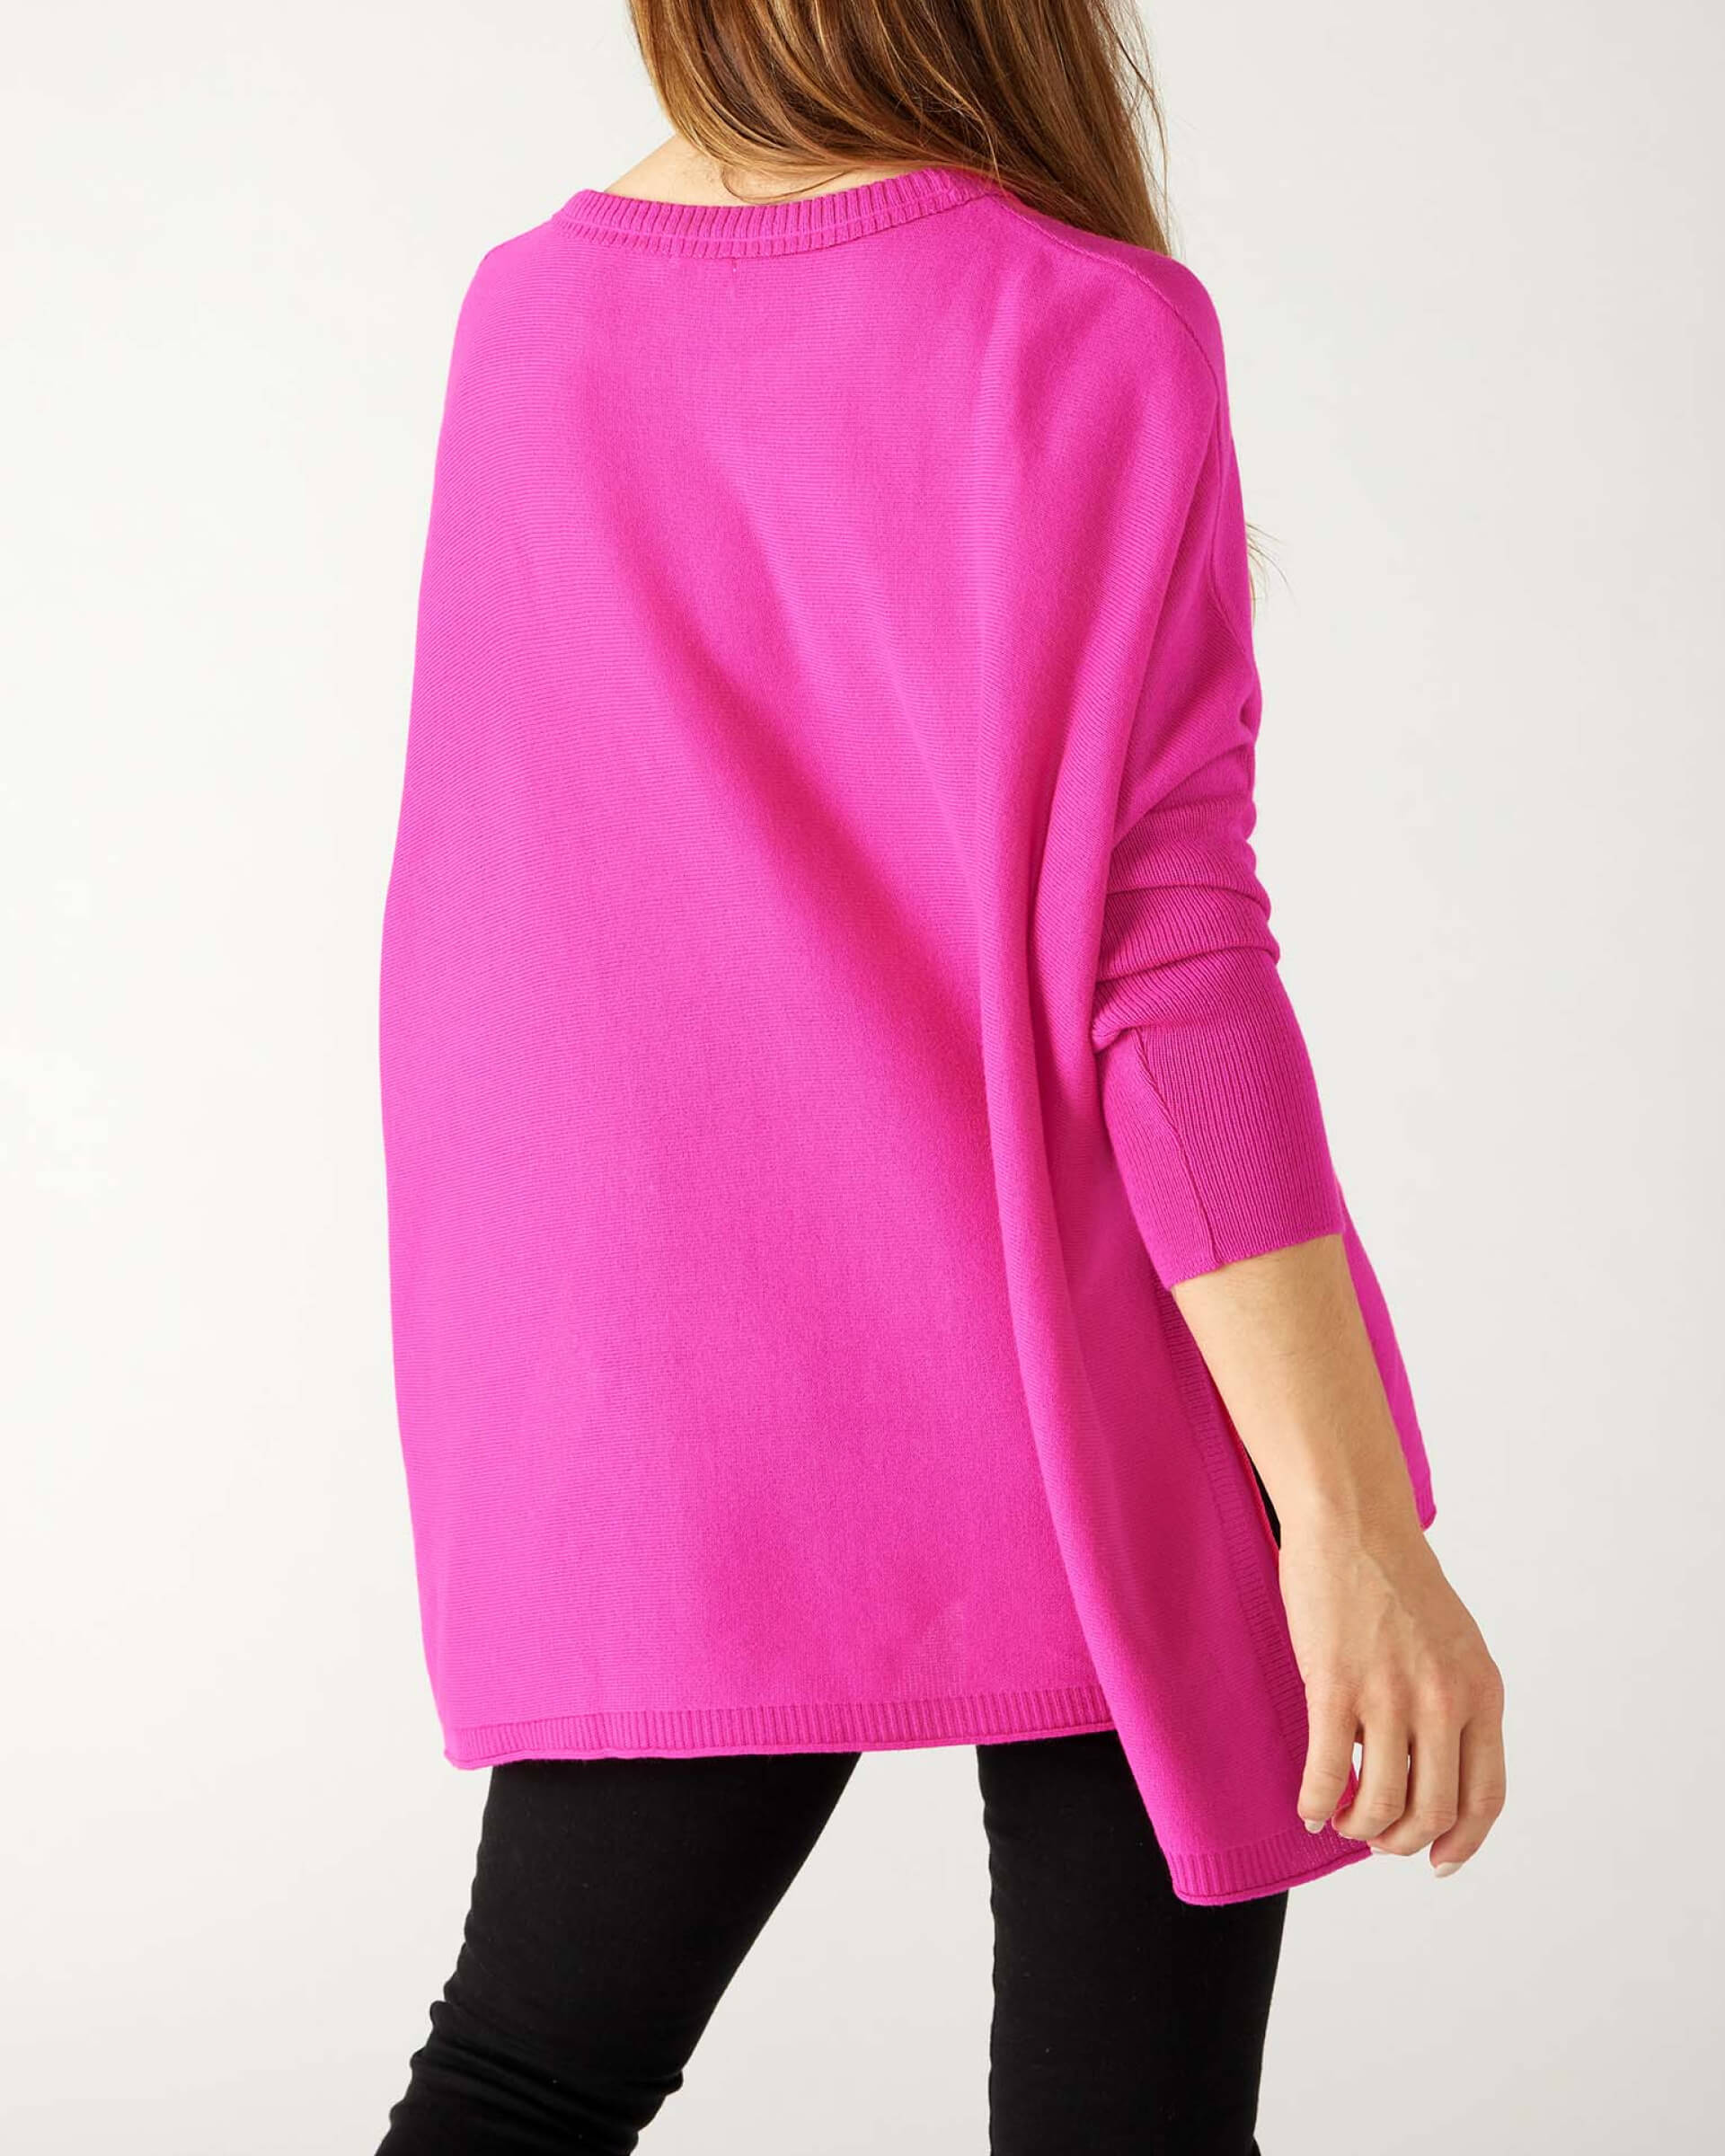 Women's Oversized Crewneck Knit Sweater in Hot Pink Back View